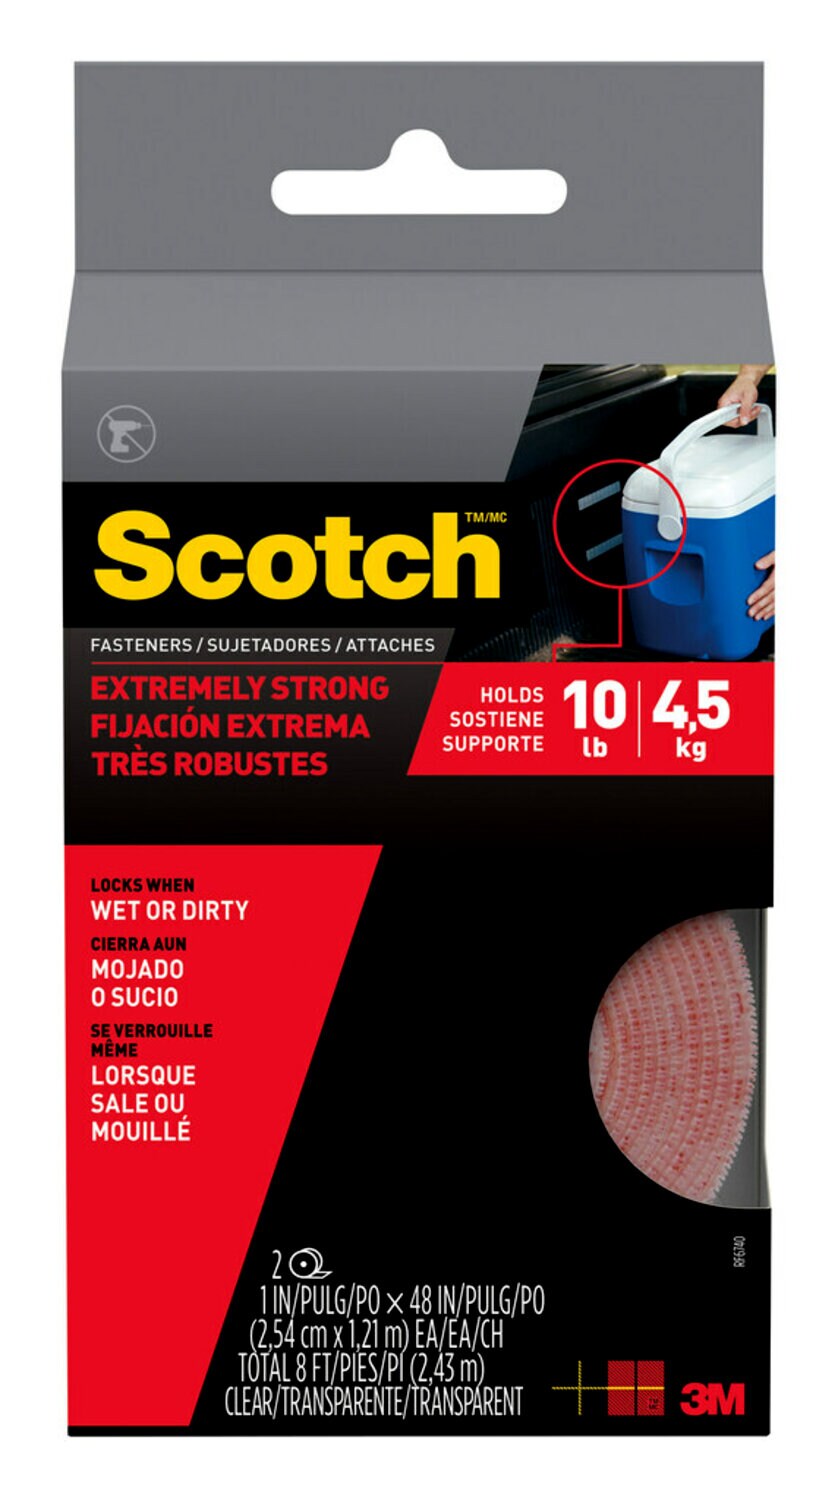 7100110899 - Scotch Extreme Fasteners RF6740, 1 in x 4 ft (25.4 mm x 1.21 m), Clear, 2 Rolls